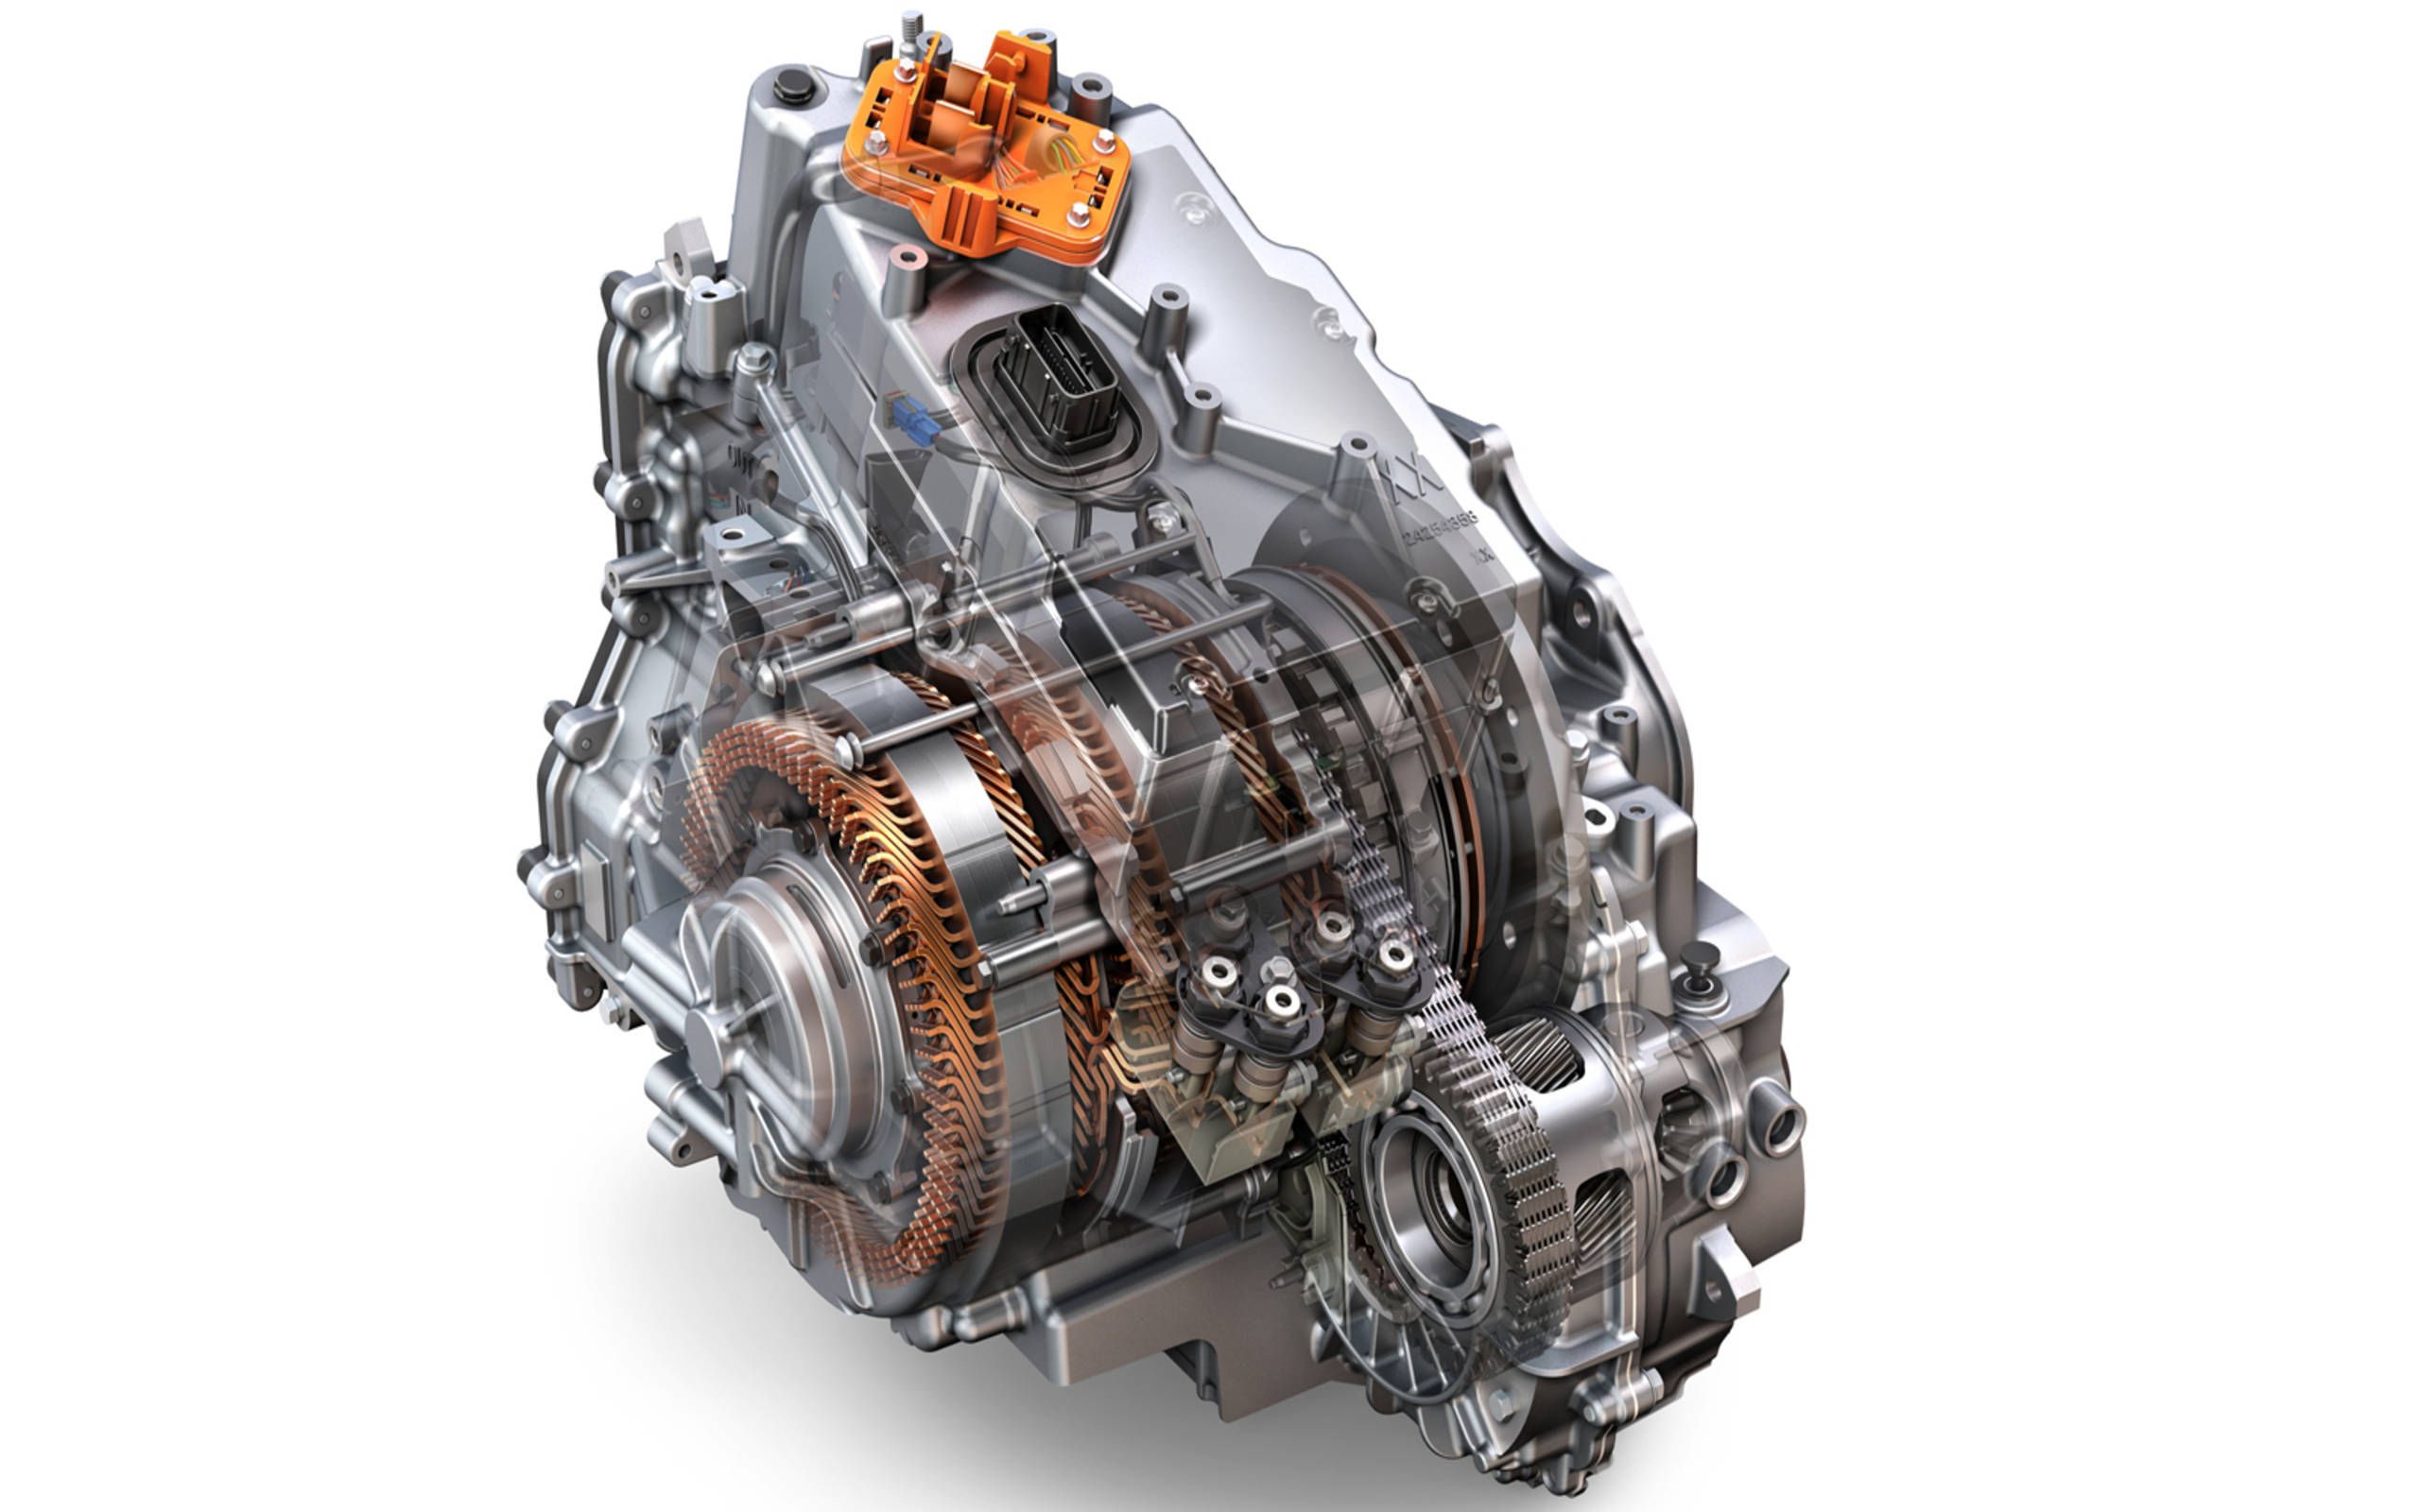 power transmission in ic engines